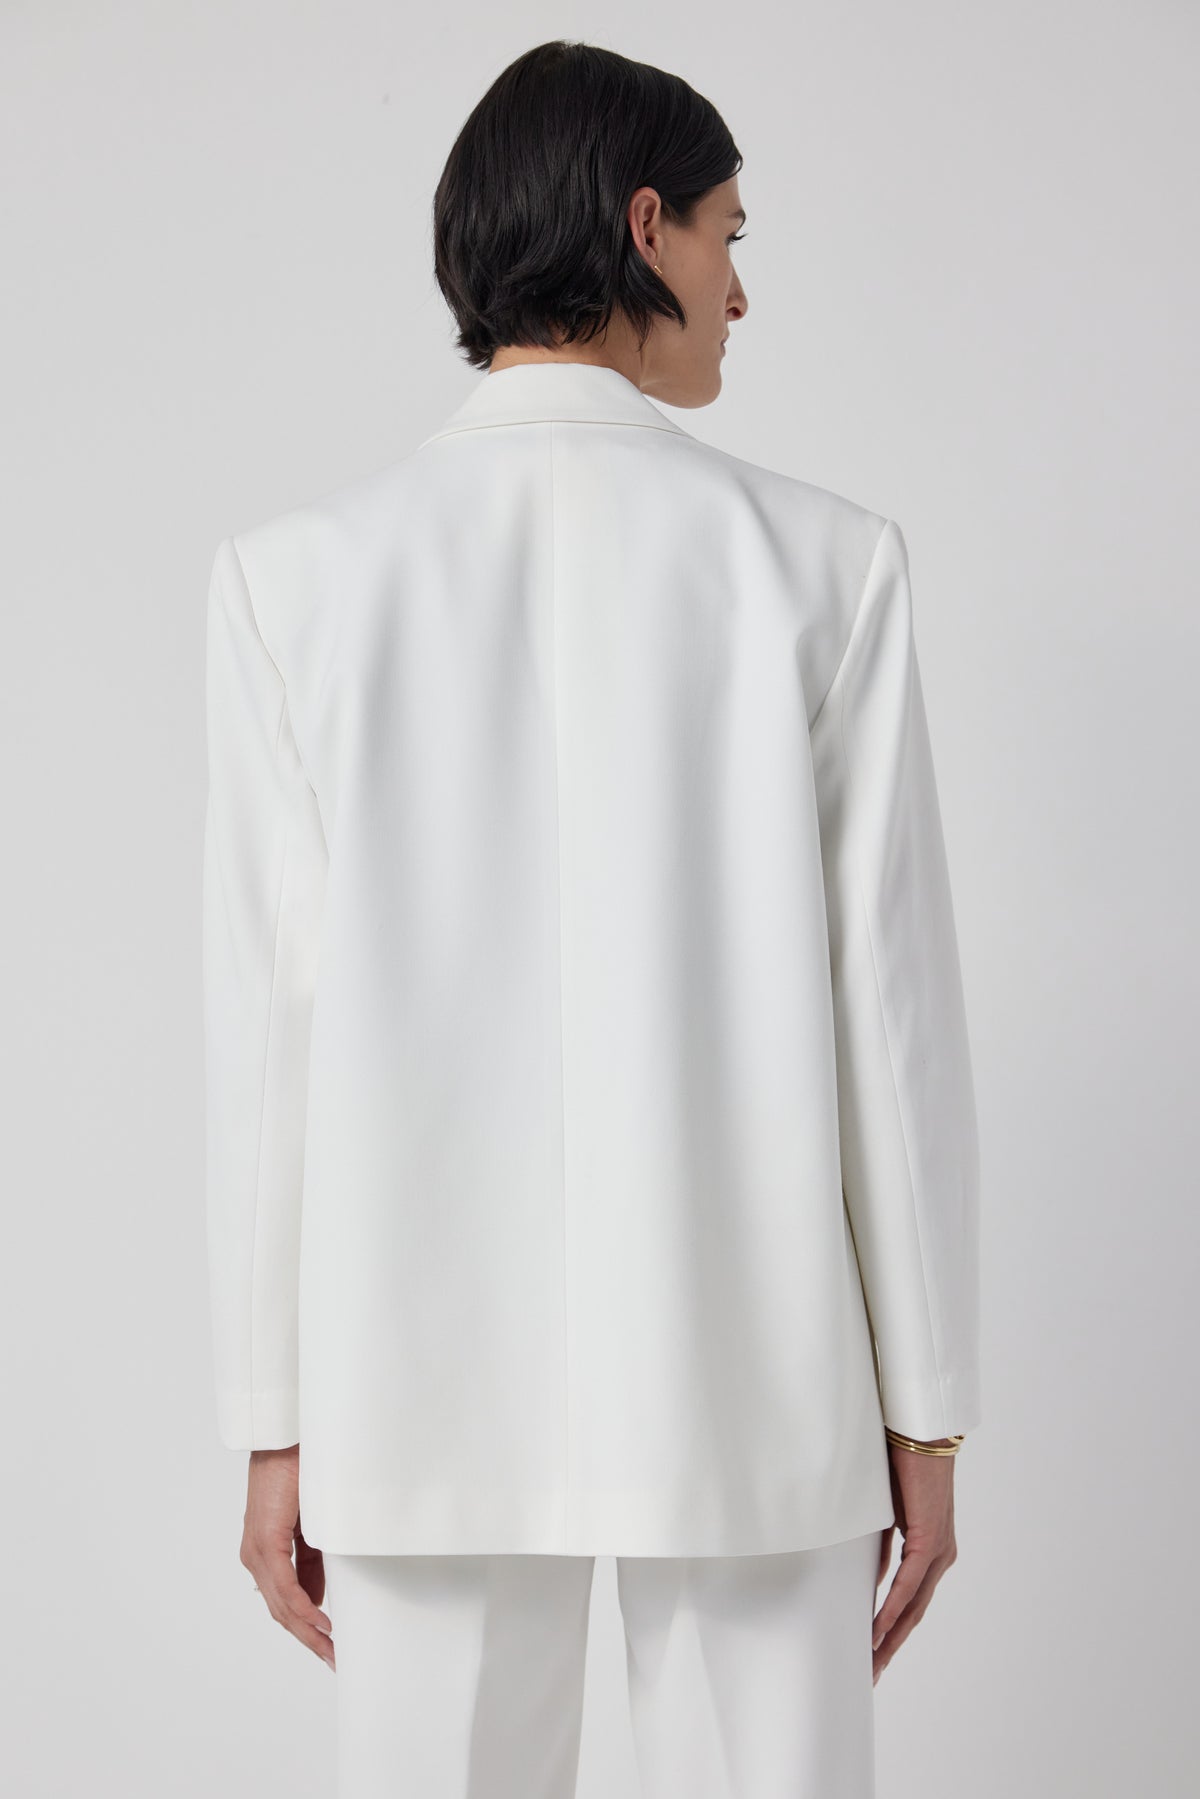 The back view of a woman wearing a structured white Fairfax blazer and pants by Velvet by Jenny Graham.-36168664350913